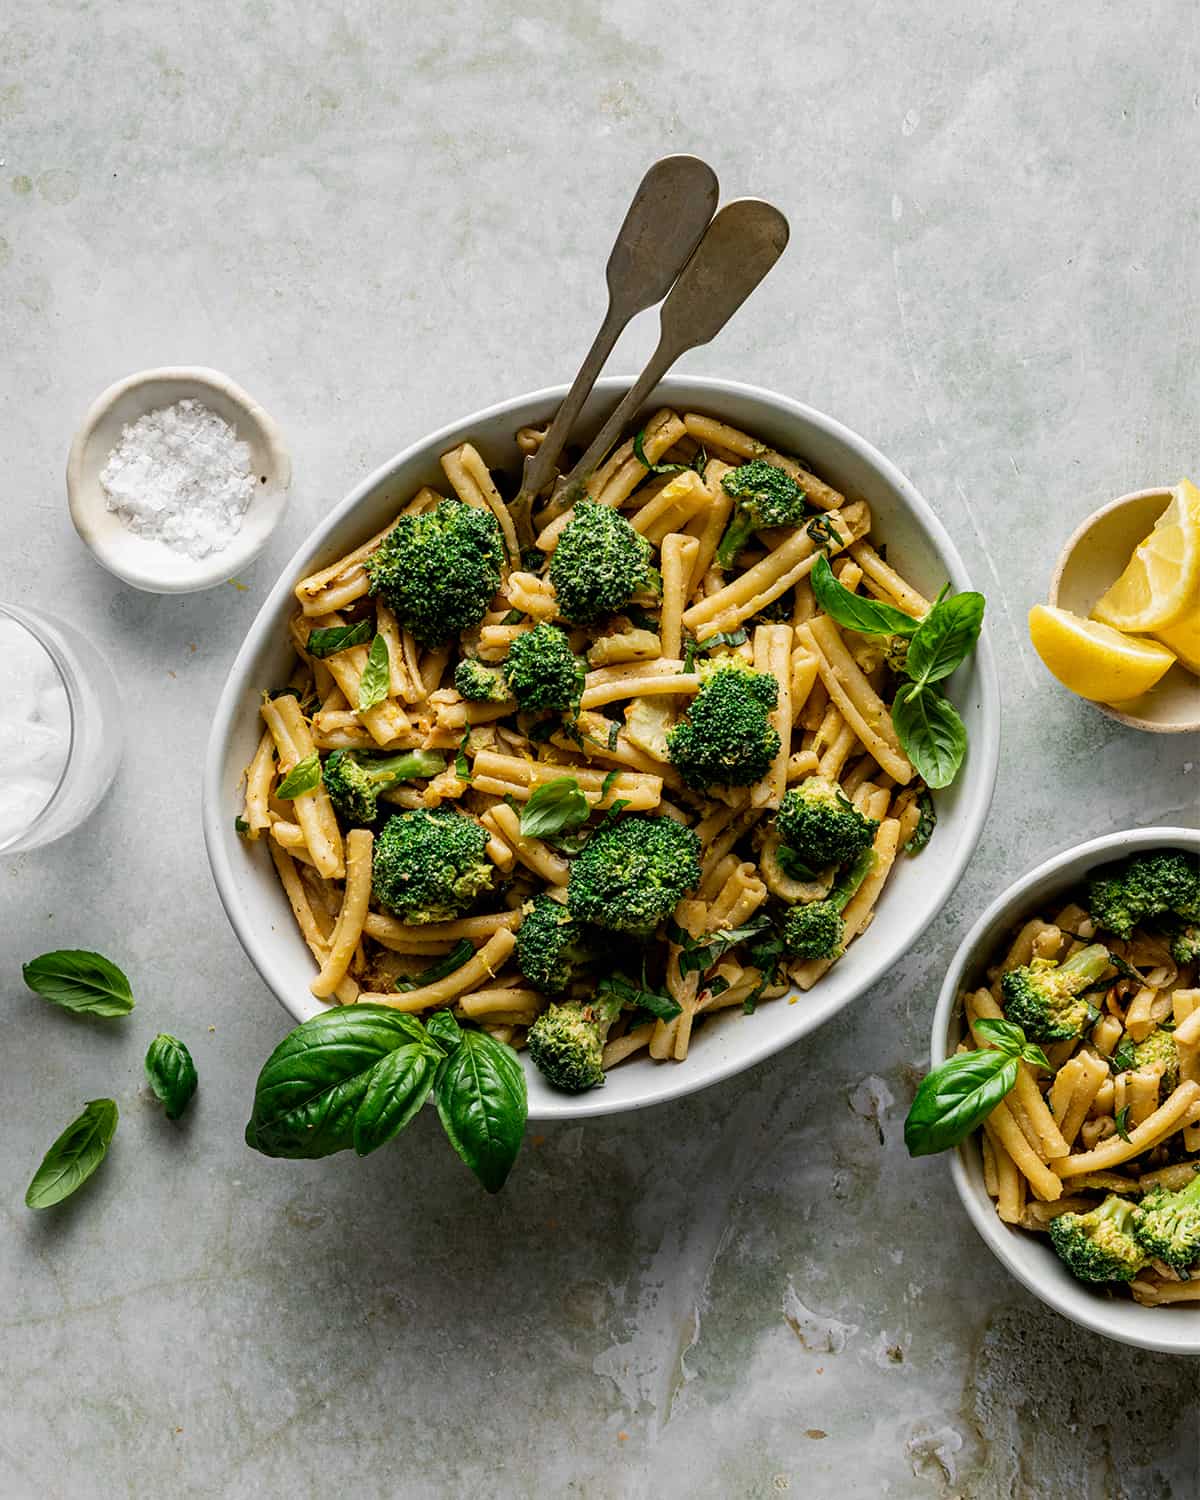 large bowl of tahini pasta with broccoli and basil, with small bowl and glass of water.